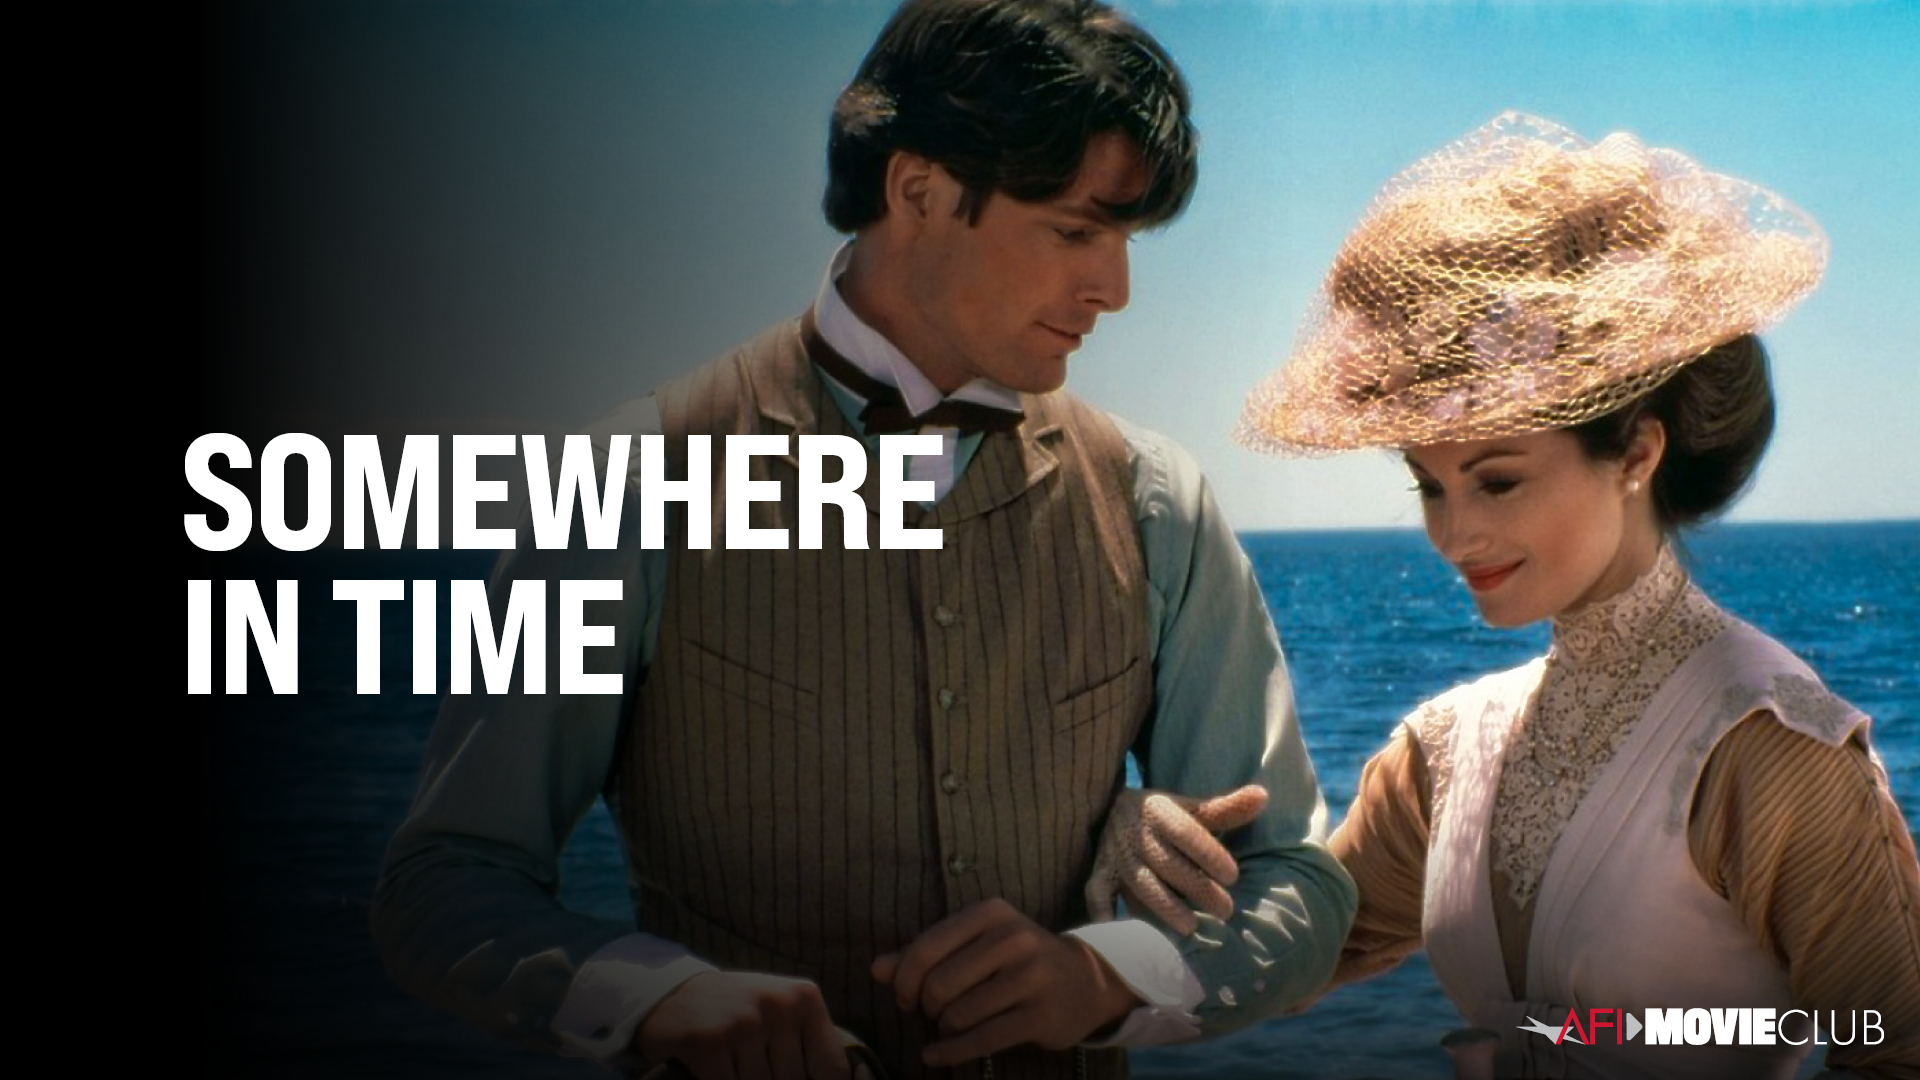 Somewhere in Time Film Still - Christopher Reeve and Jane Seymour